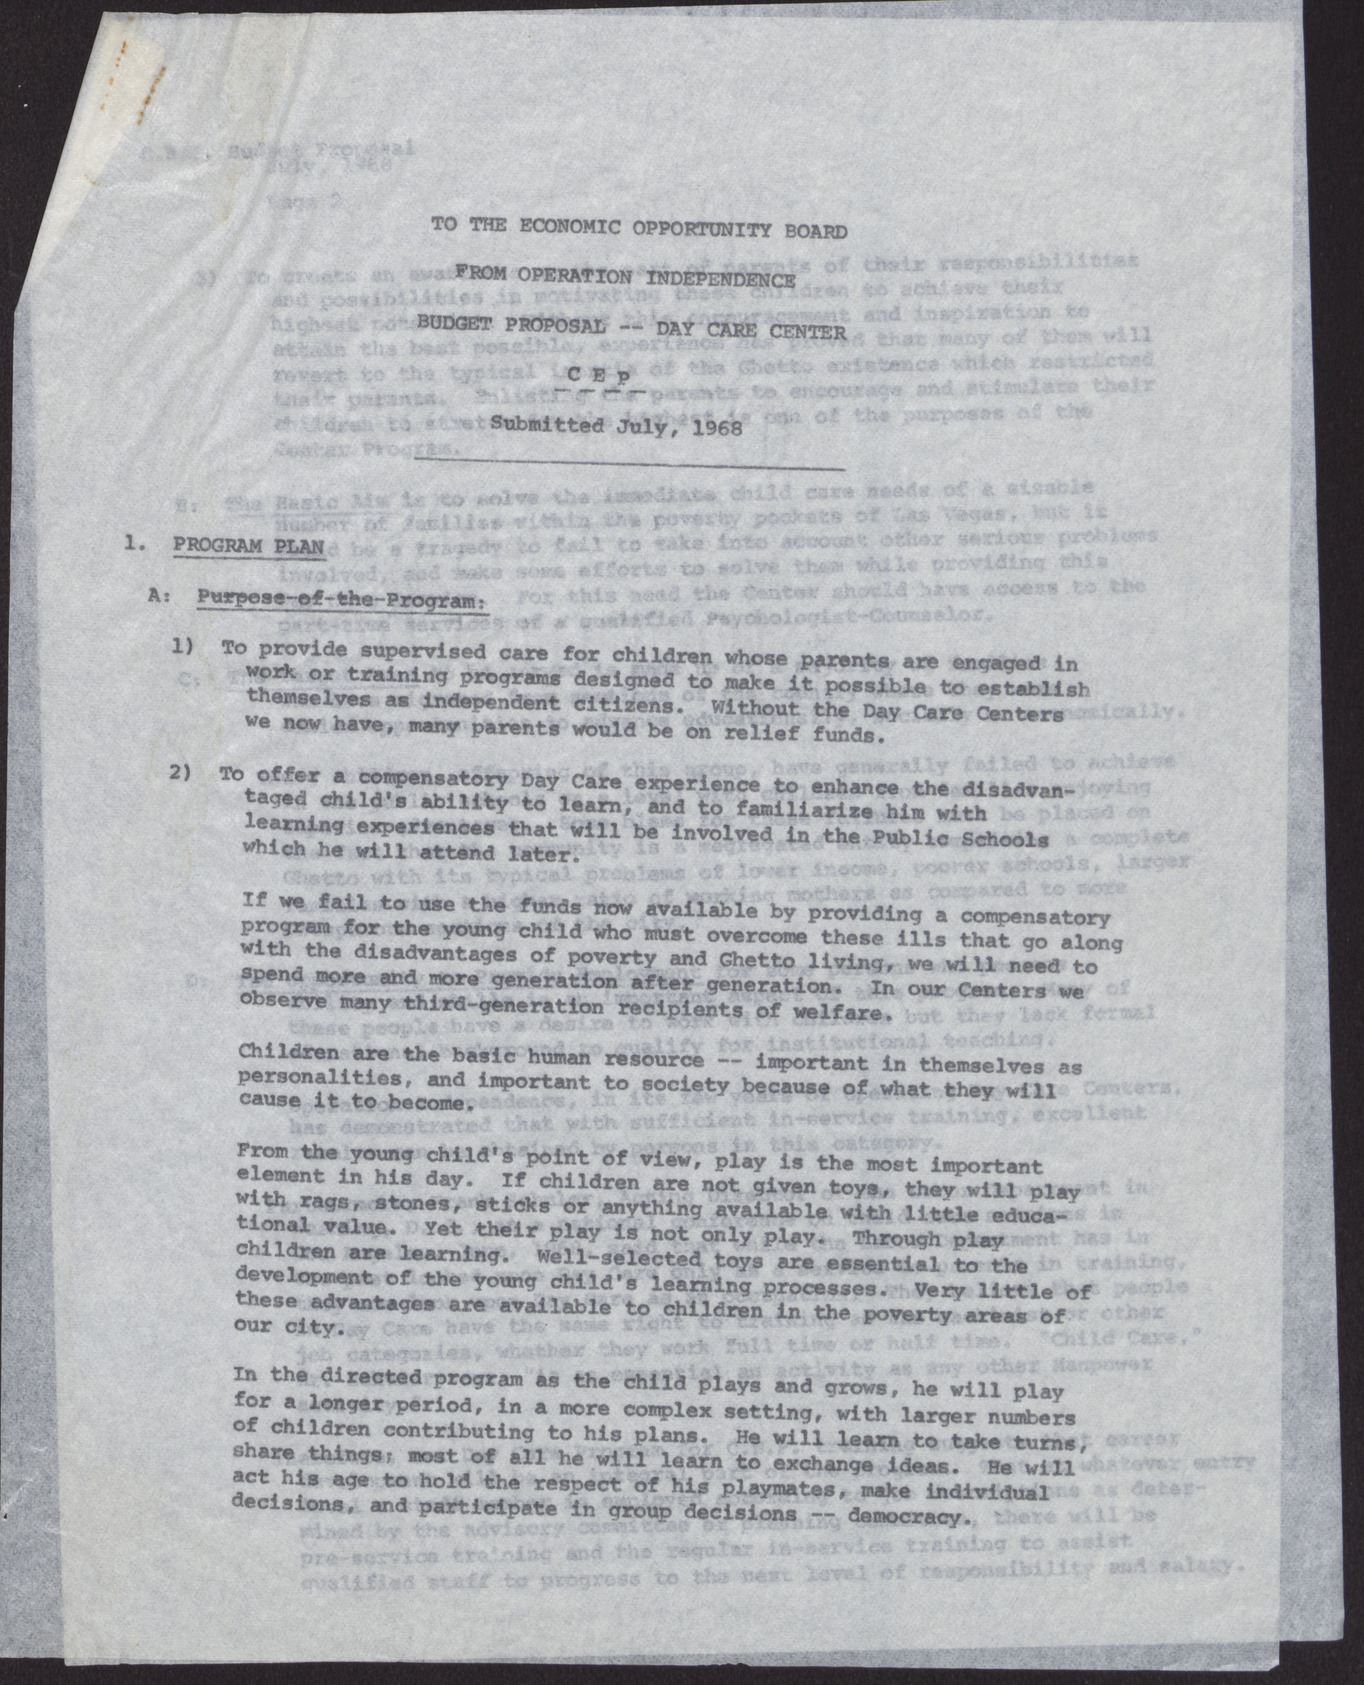 Budget Proposal to the EOB from Operation Independence (5 pages), July 1968